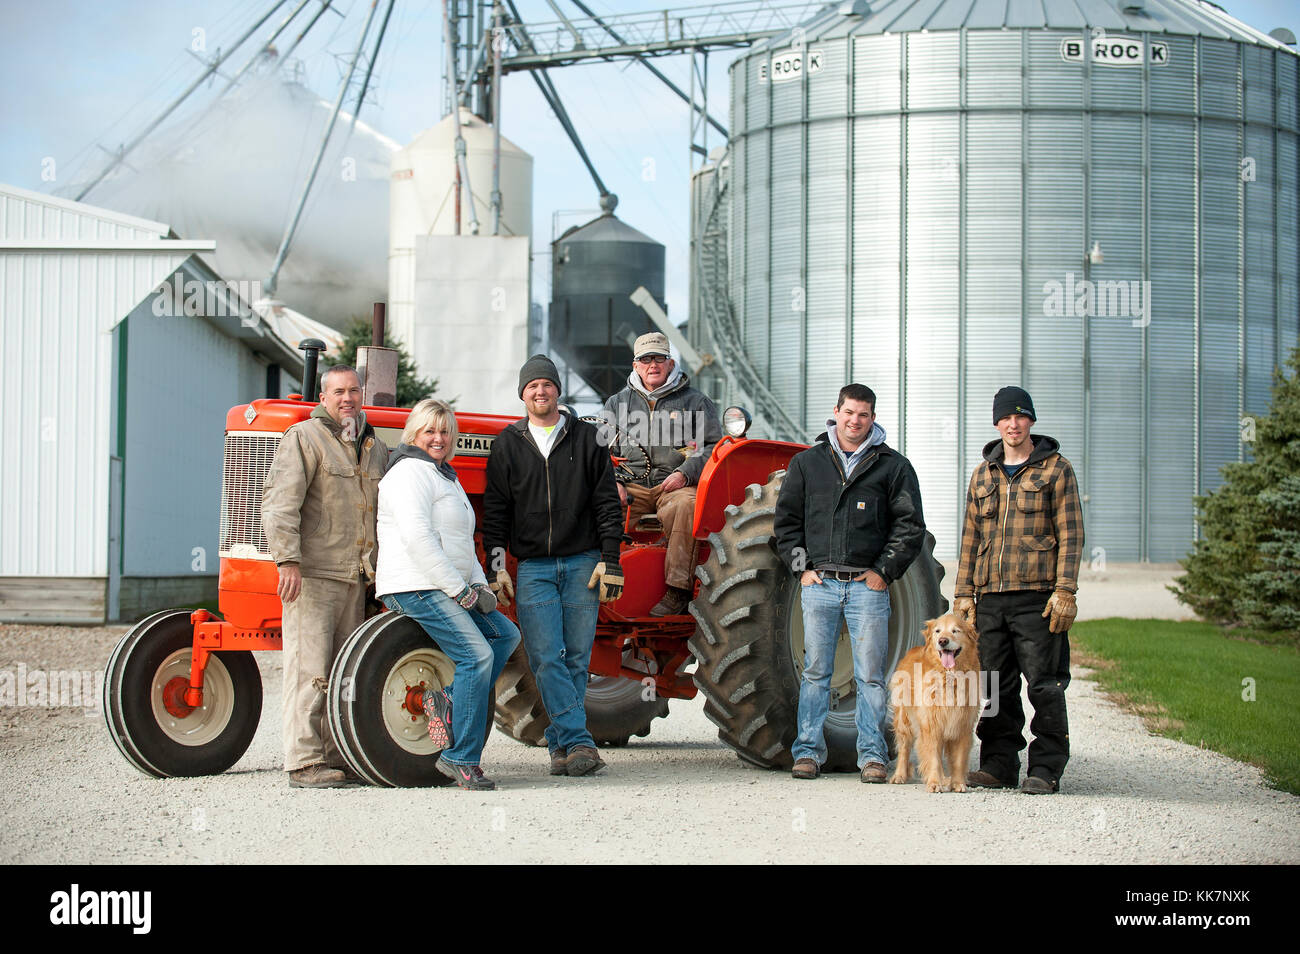 THREE GENERATIONS FAMILY PORTRAIT ON THEIR CLASSIC ALLIS-CHALMERS TRACTOR ON THEIR FARM IN BLOOMING PRAIRIE, MINNESOTA. Stock Photo